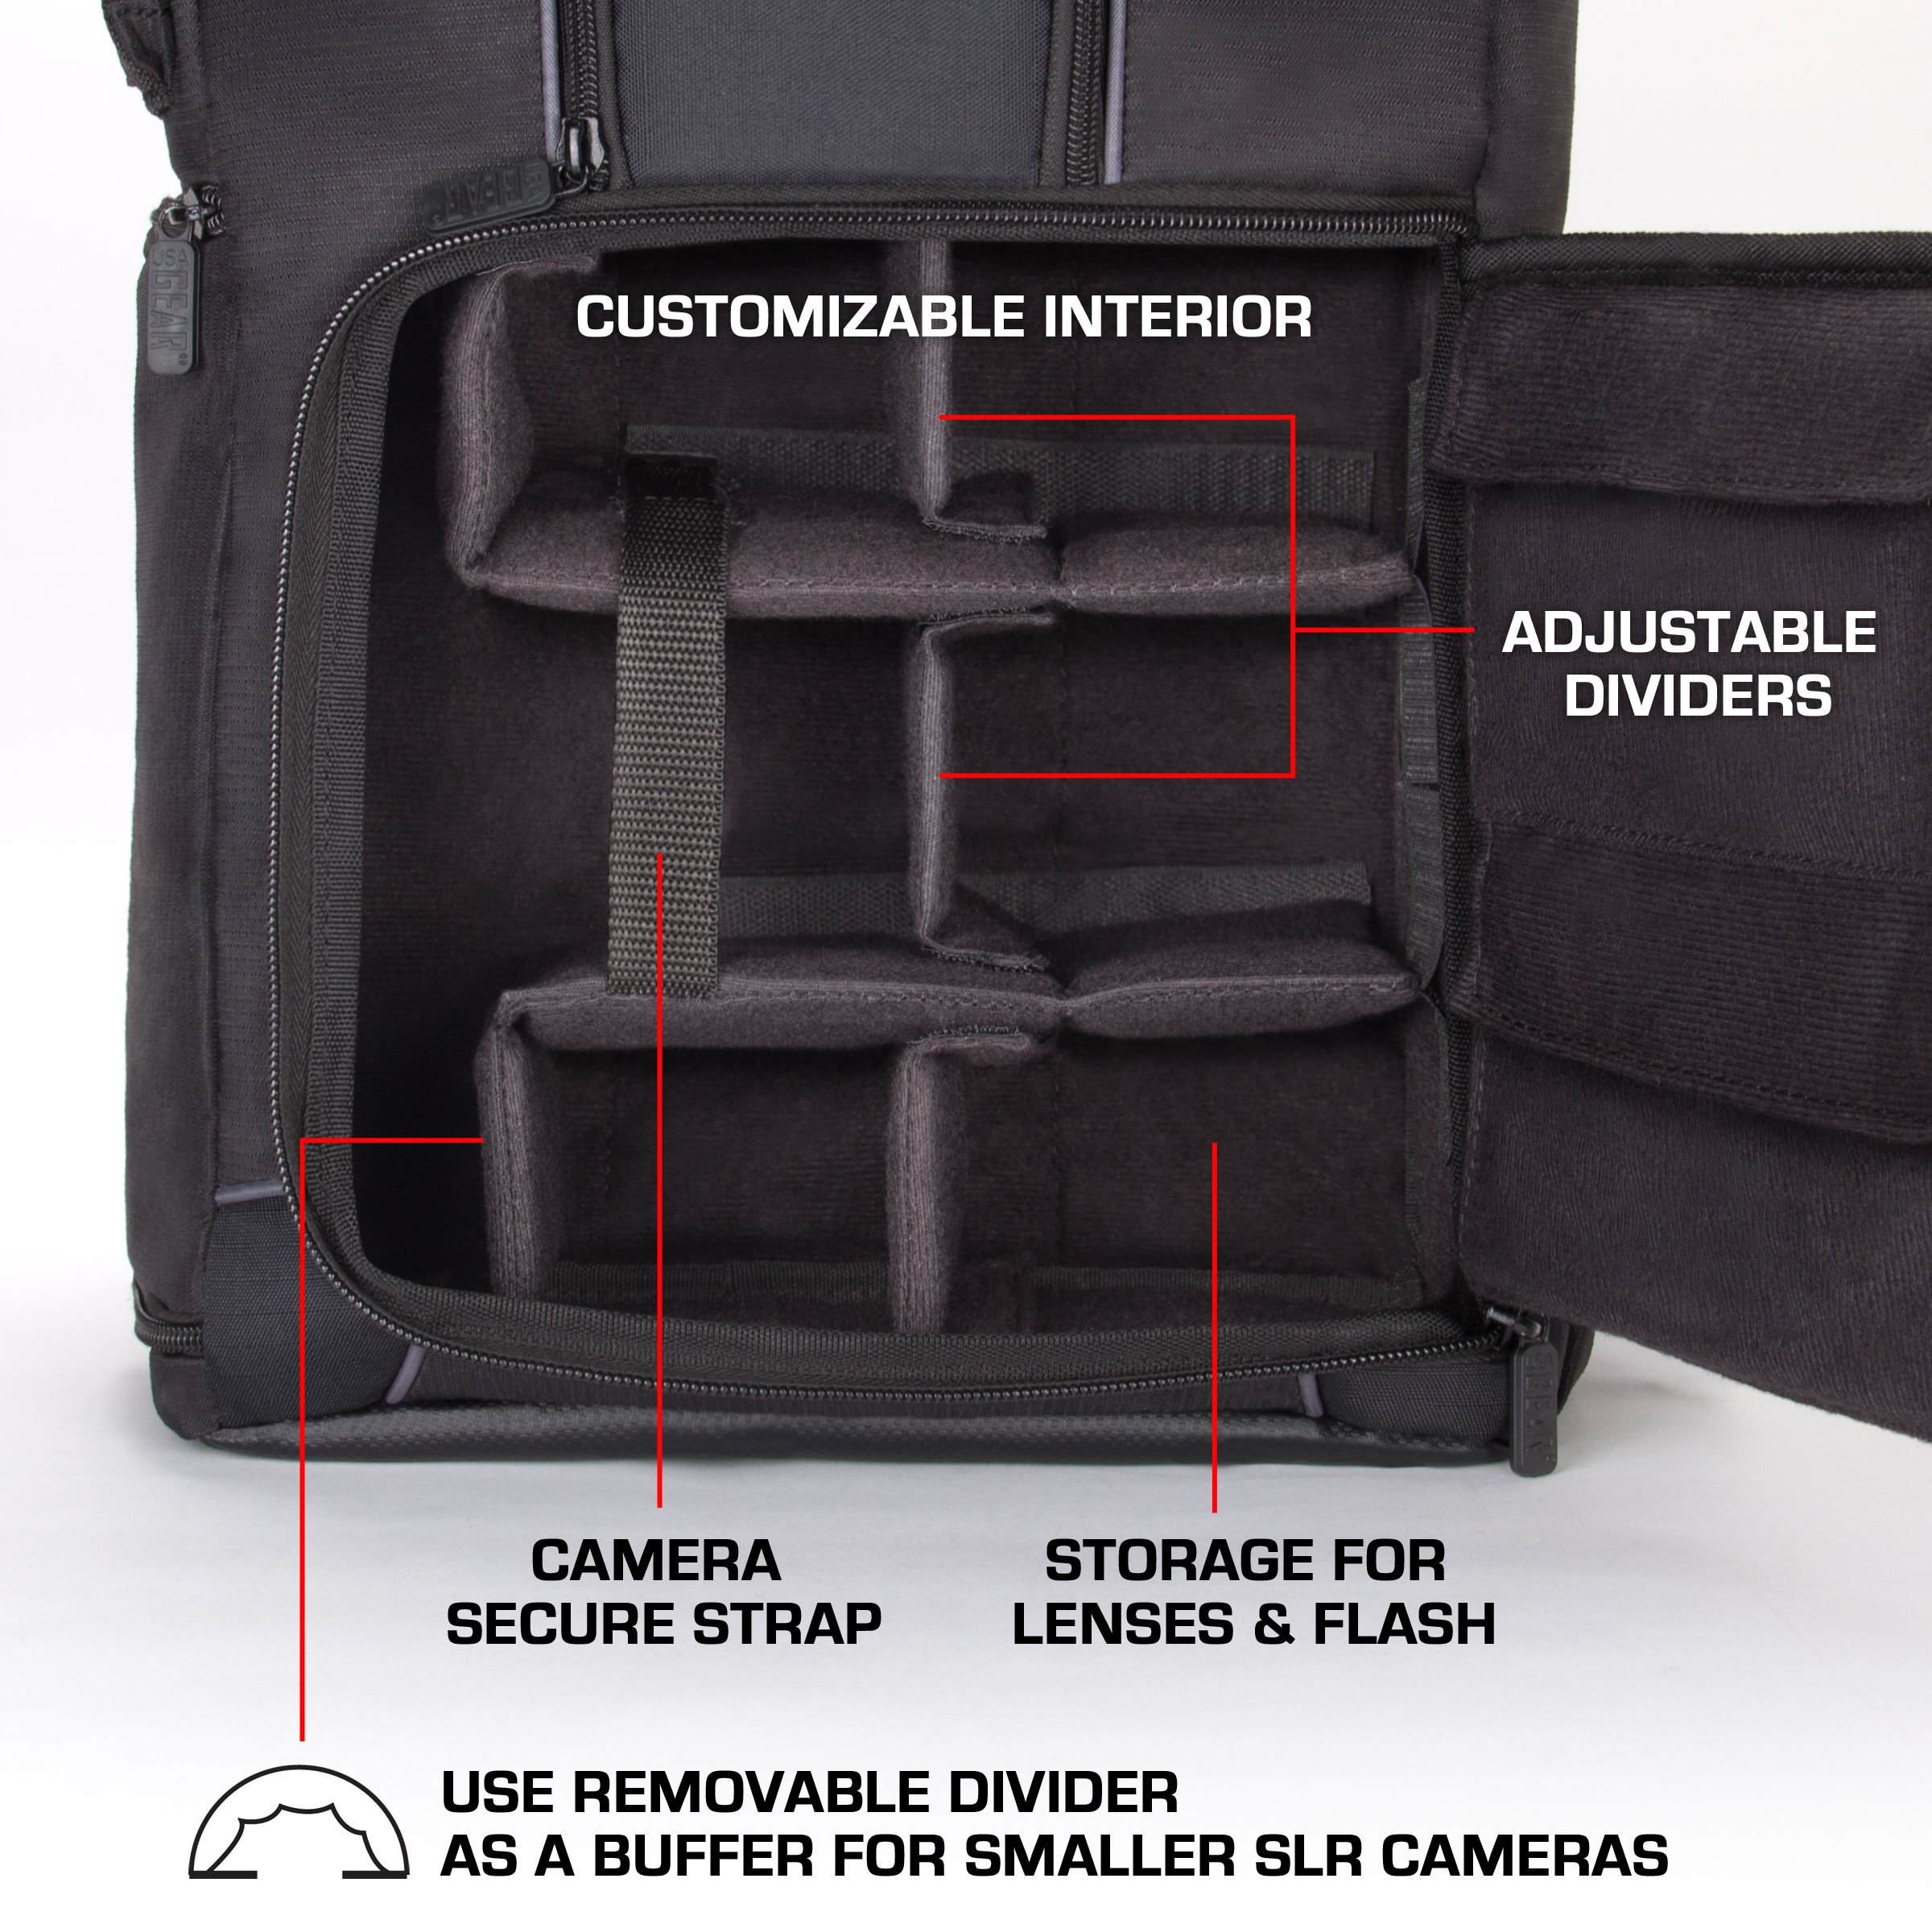 USA Gear DSLR Camera Backpack Case - 15.6 inch Laptop Compartment, Padded Custom Dividers, Tripod Holder, Rain Cover, Long-Lasting Durability and Storage Pockets - Compatible with Many DSLRs (Black)